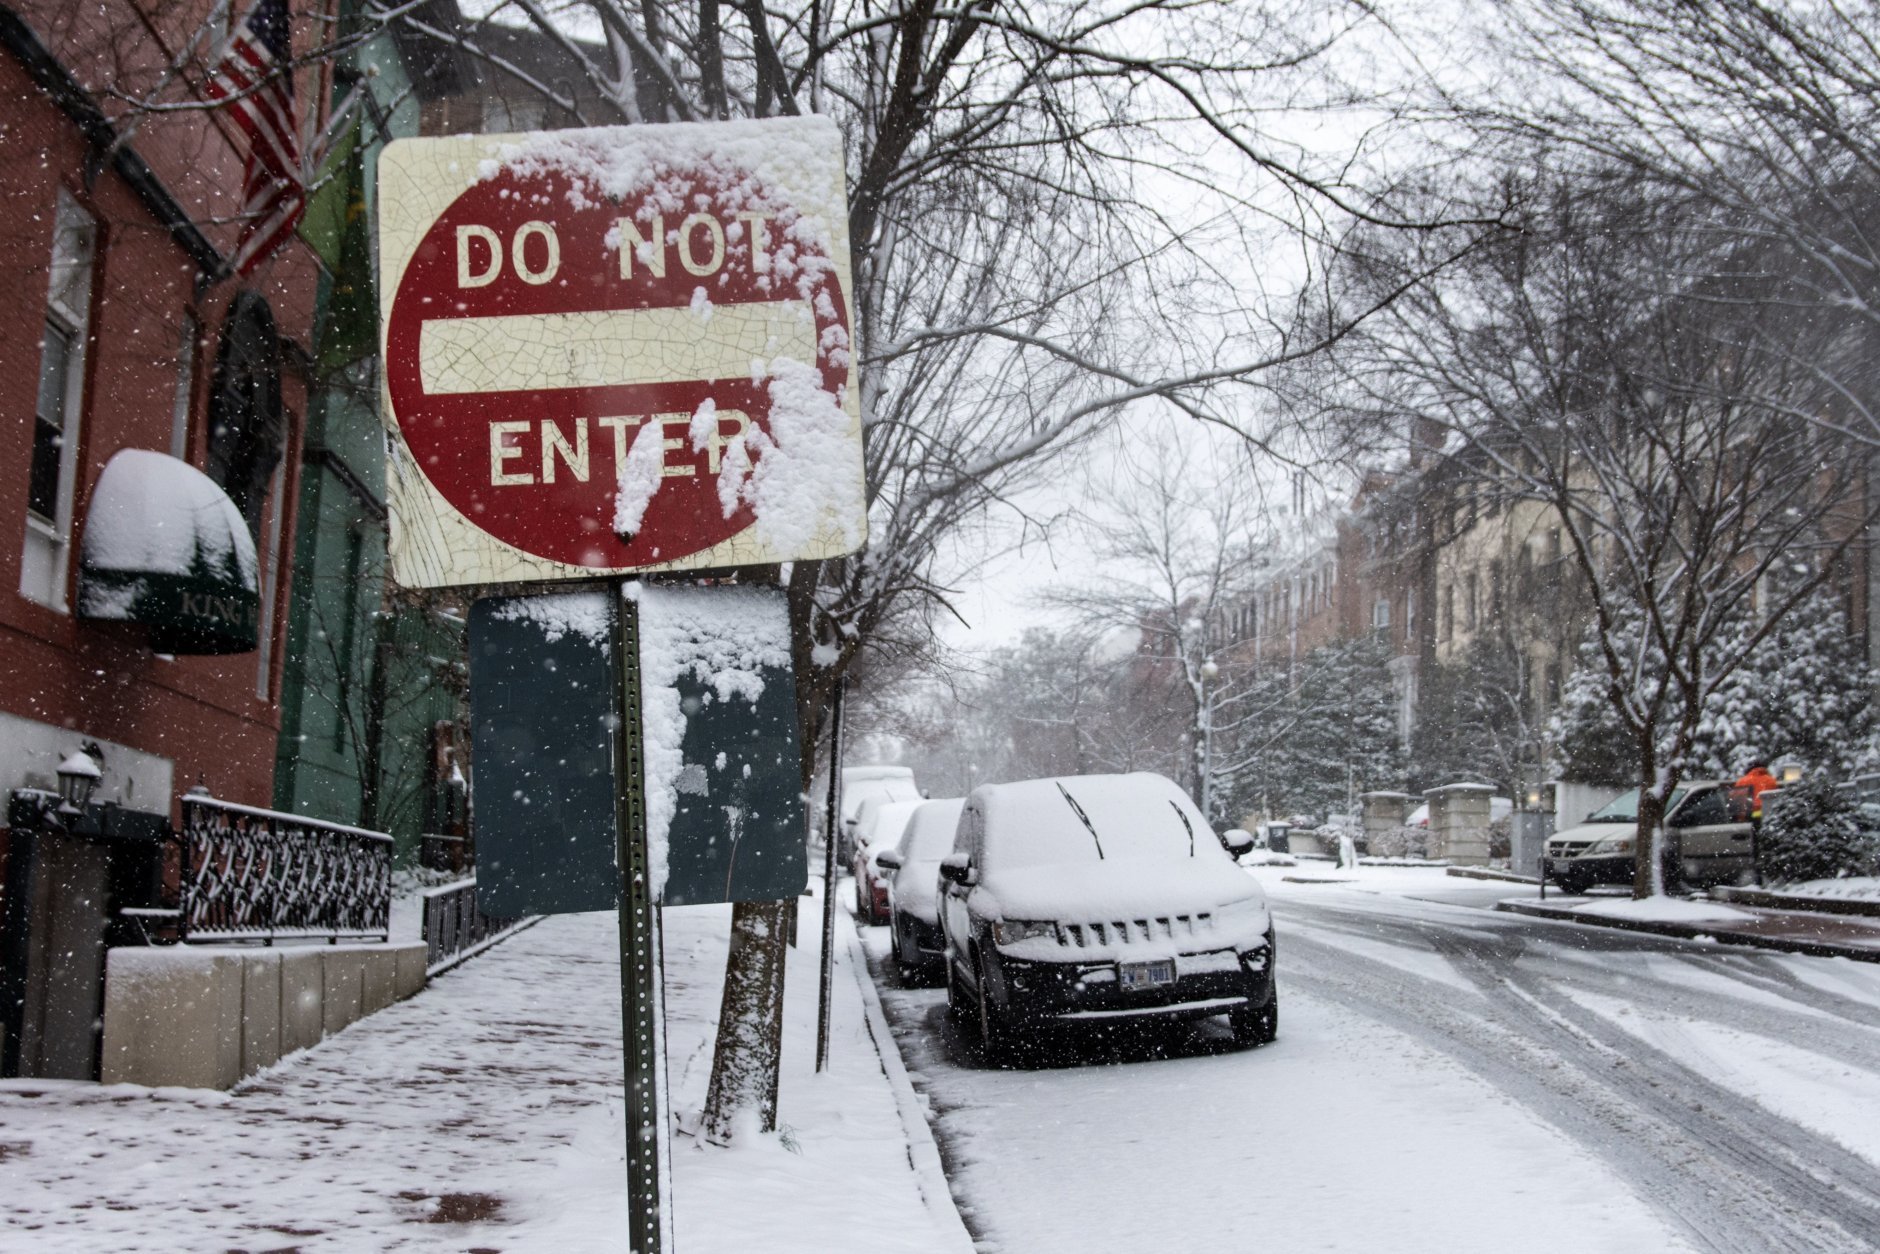 A snow-covered street sign near D.C.’s Dupont Circle on Wednesday morning. Normally busting with commuters at this time, traffic in this Connecticut Avenue neighborhood was light on Wednesday morning, with most residents indoors or salting sidewalks. (WTOP/Alejandro Alvarez)